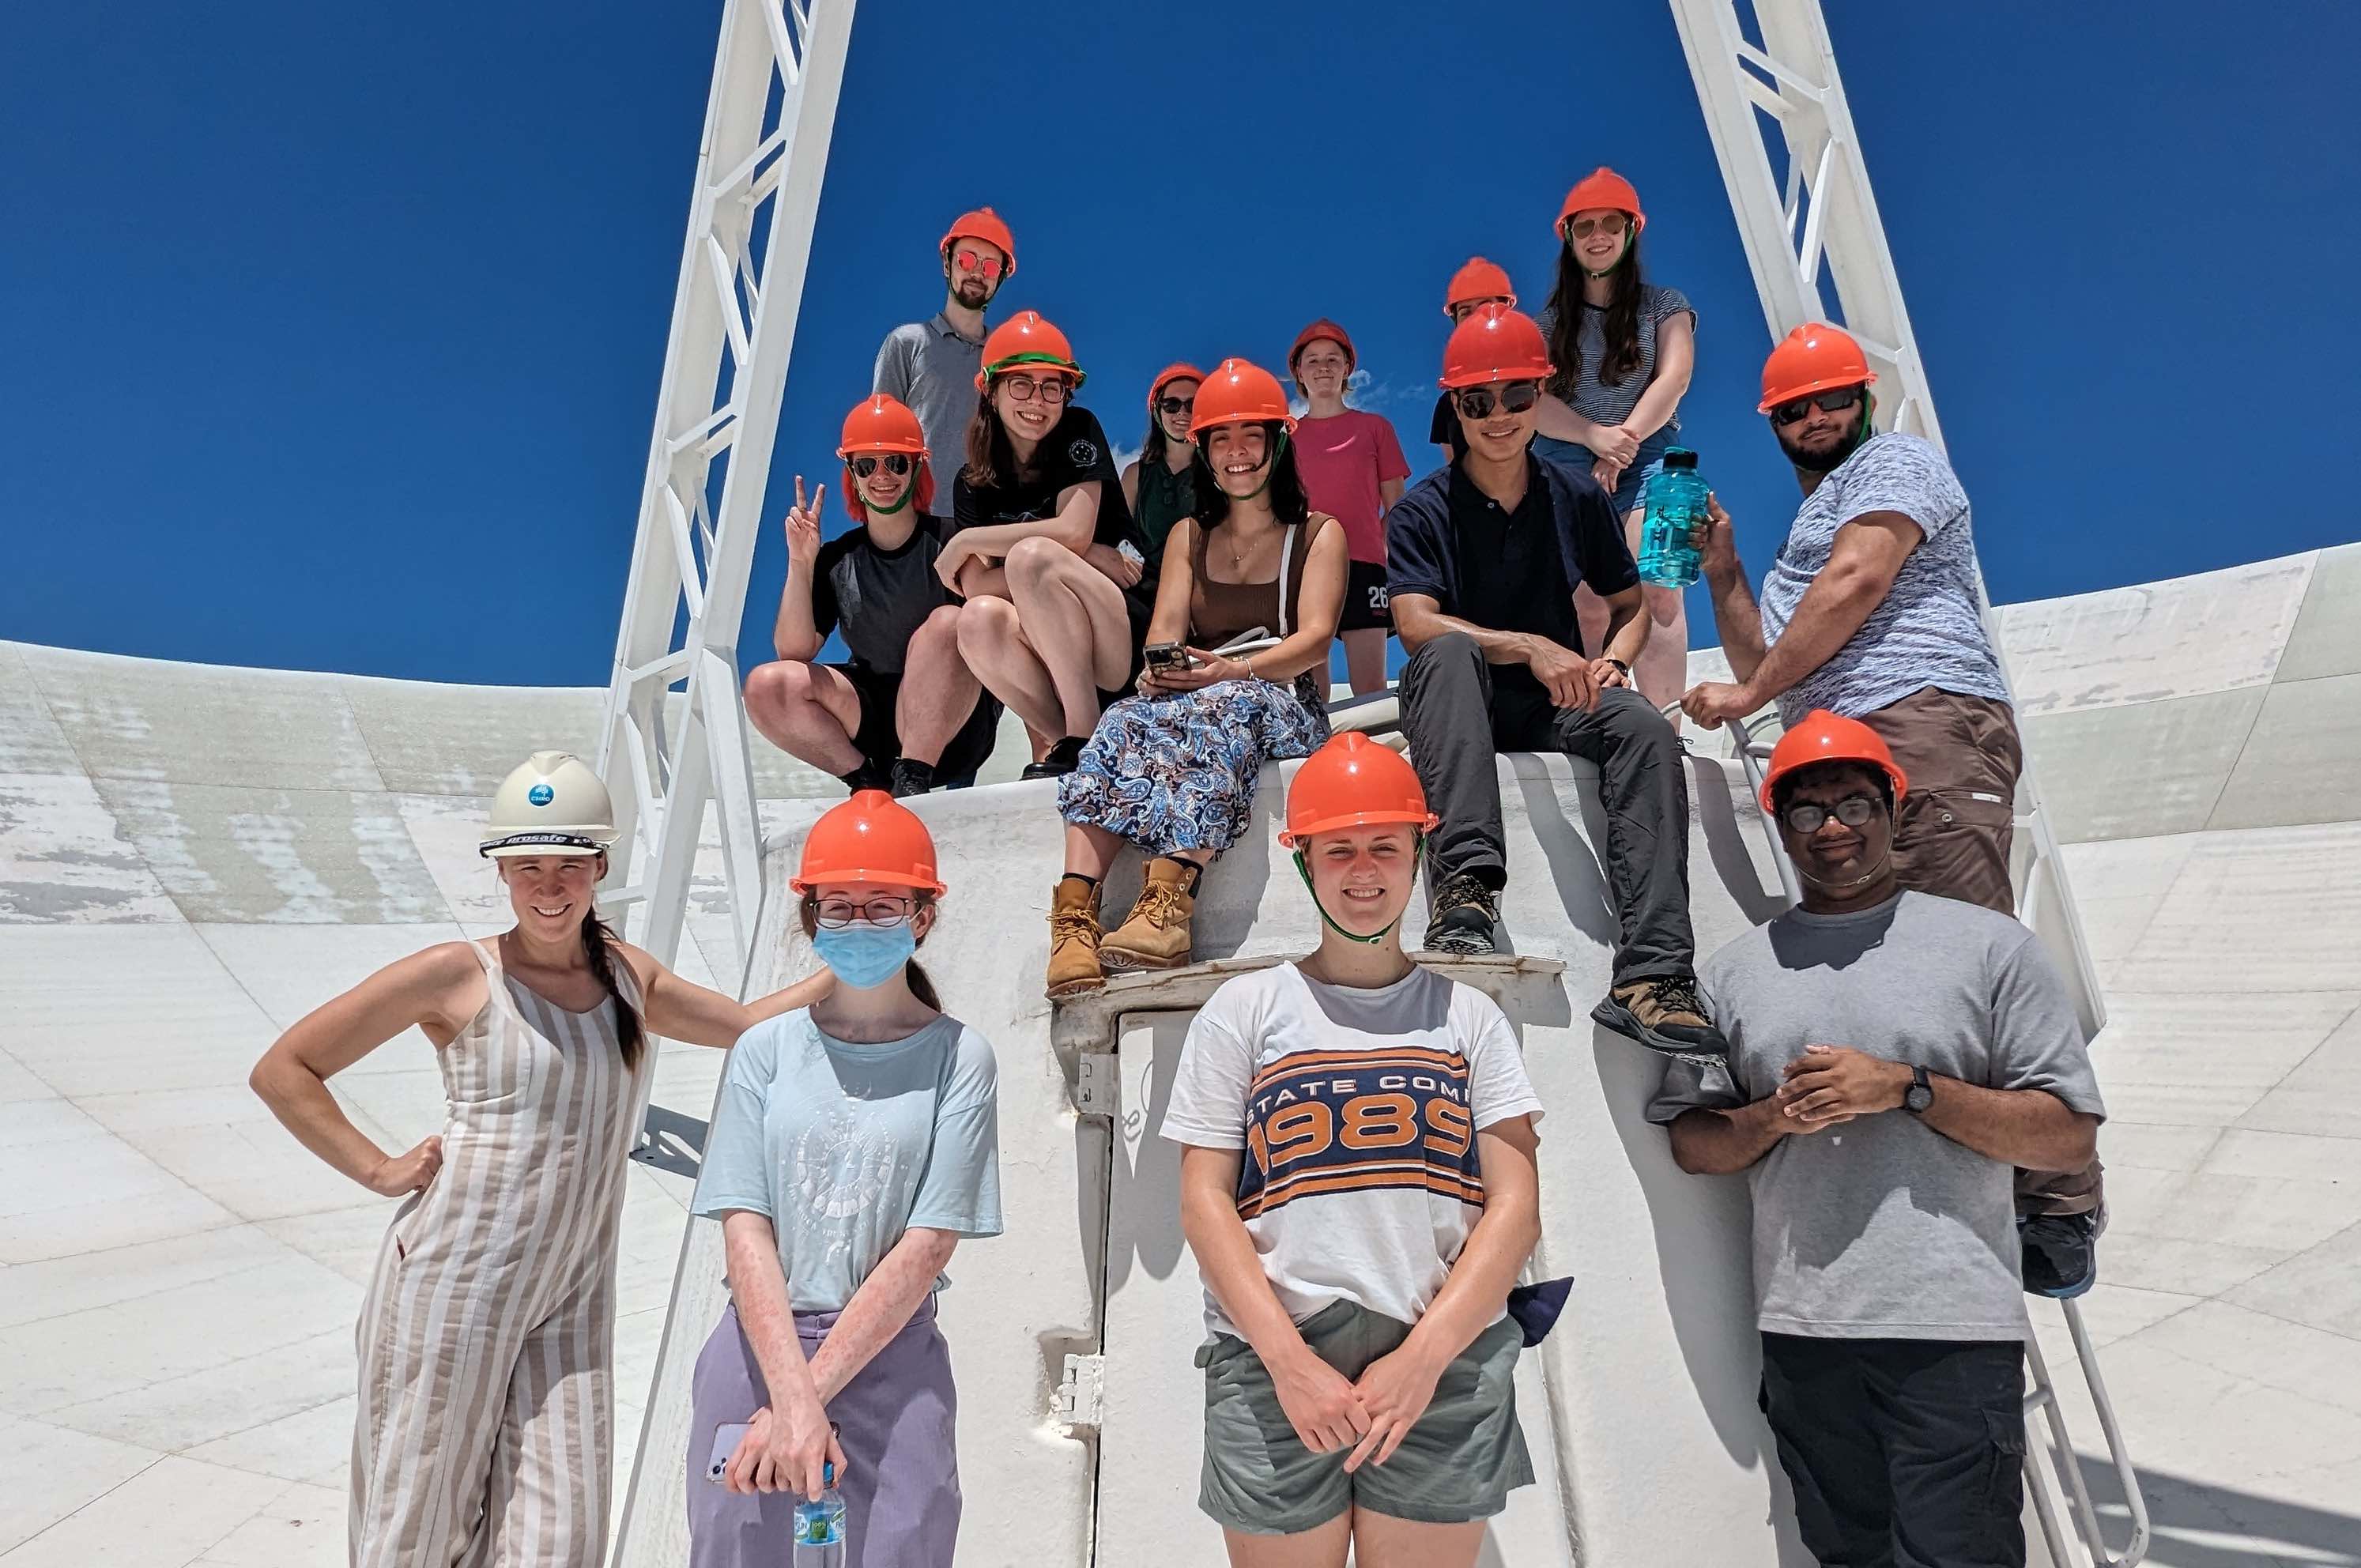 An image of the vacation students on the dish of an ATCA antenna, taken during their observing trip